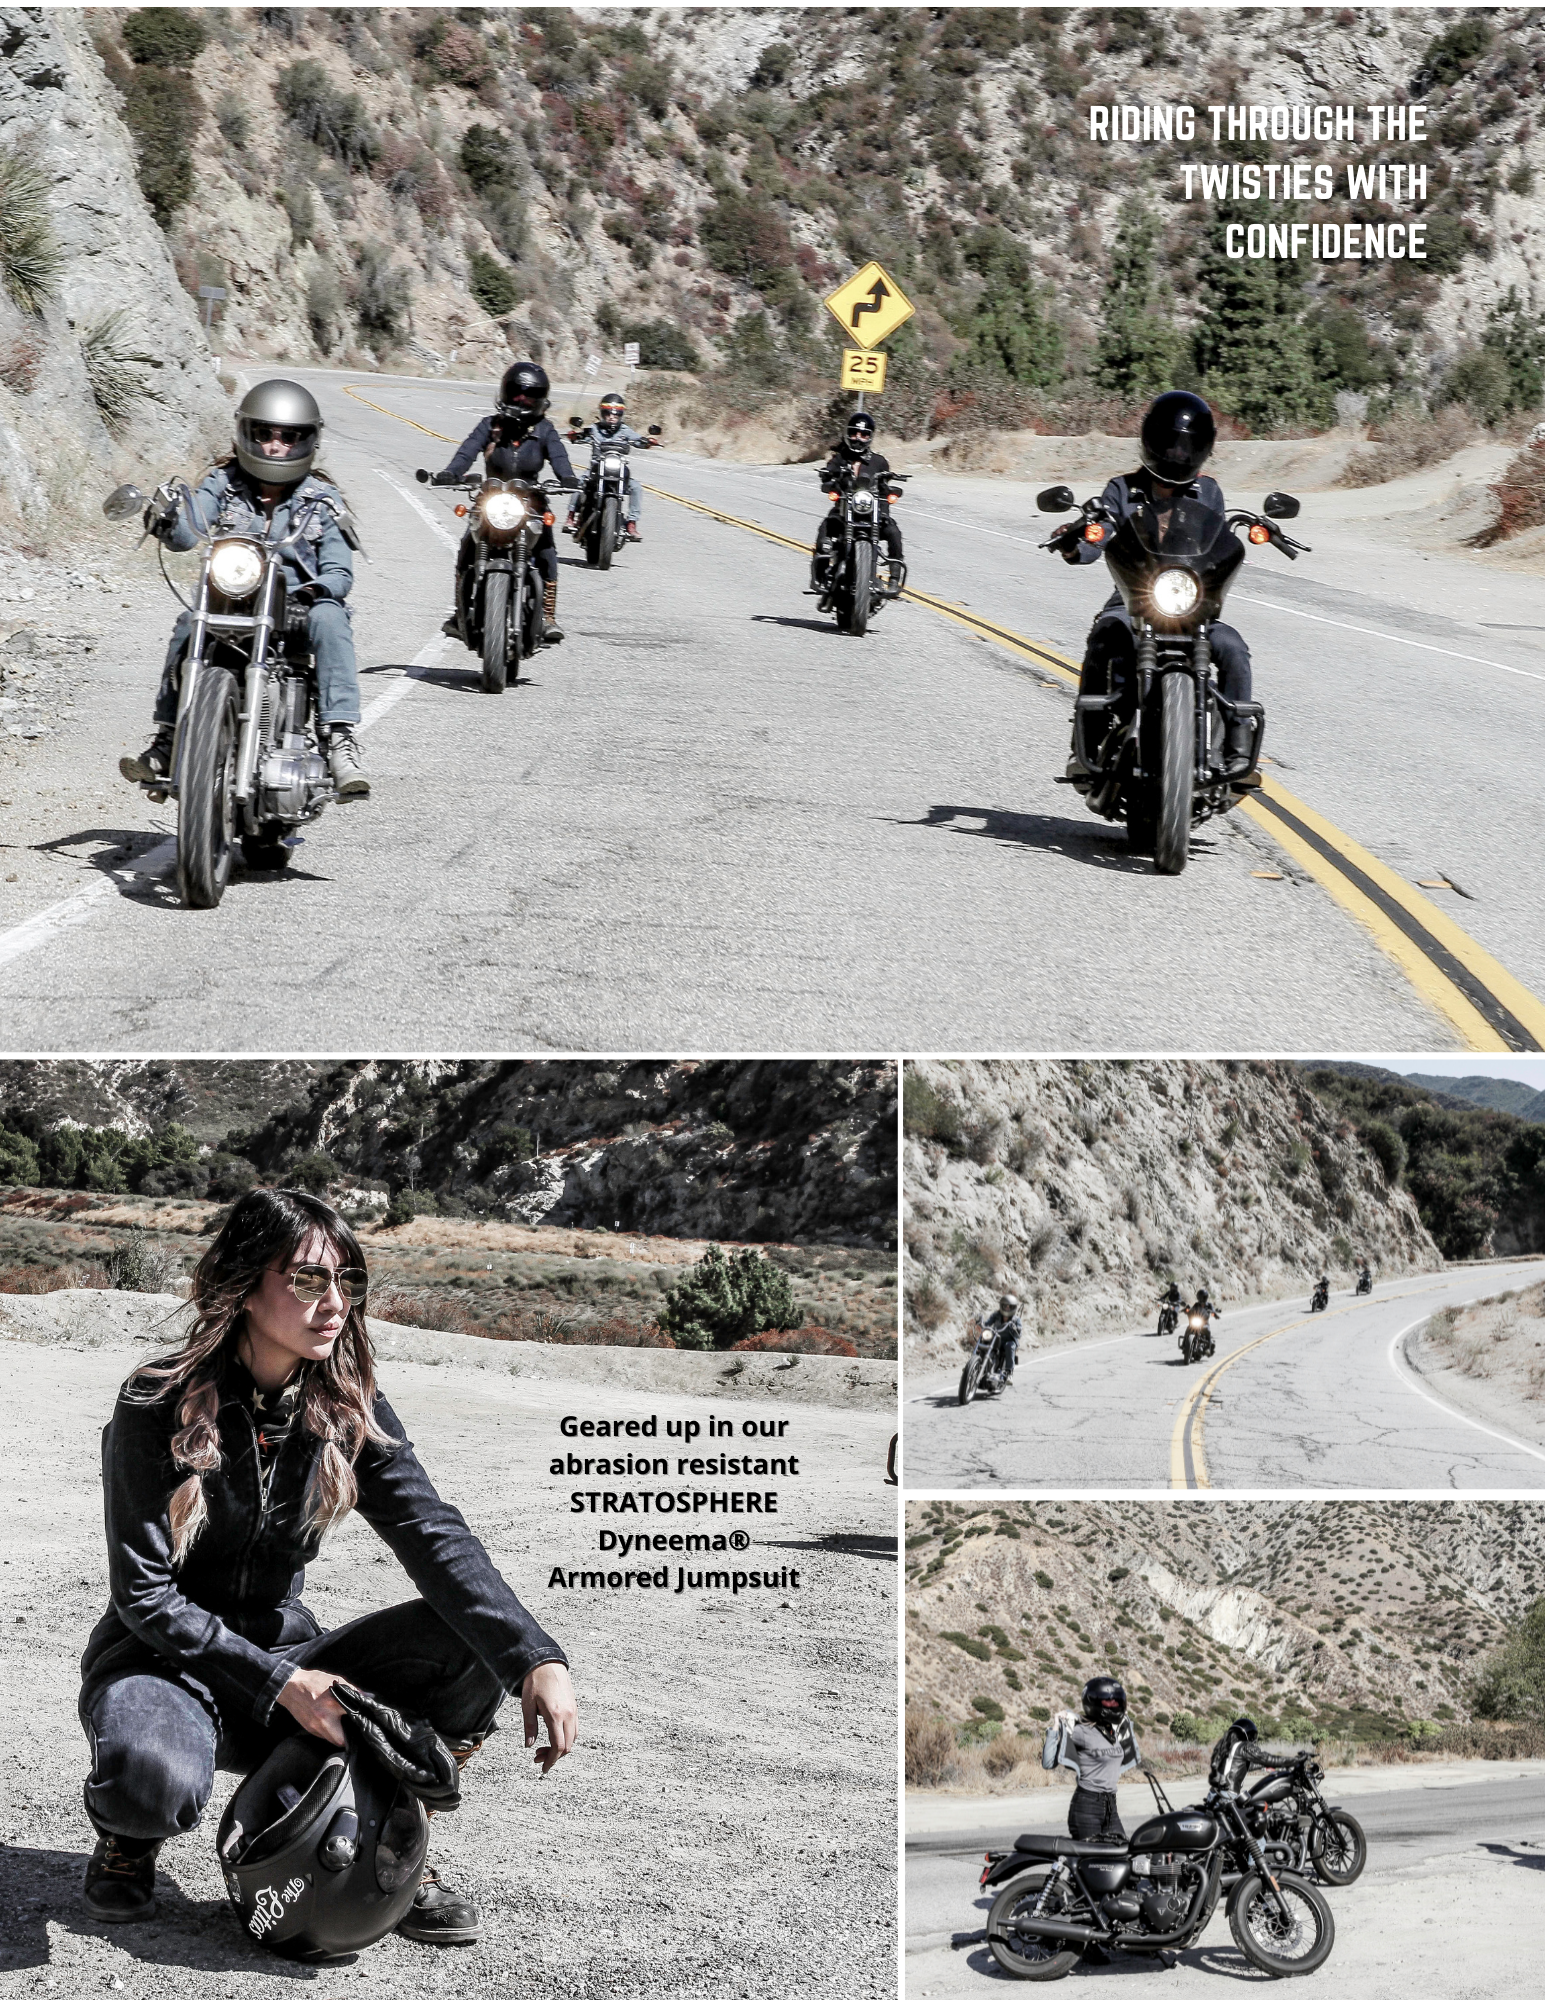 Riding through the twisties with confidence: Geared up in our abrasion resistant STRATOSPHERE Dyneema® Armored Jumpsuit